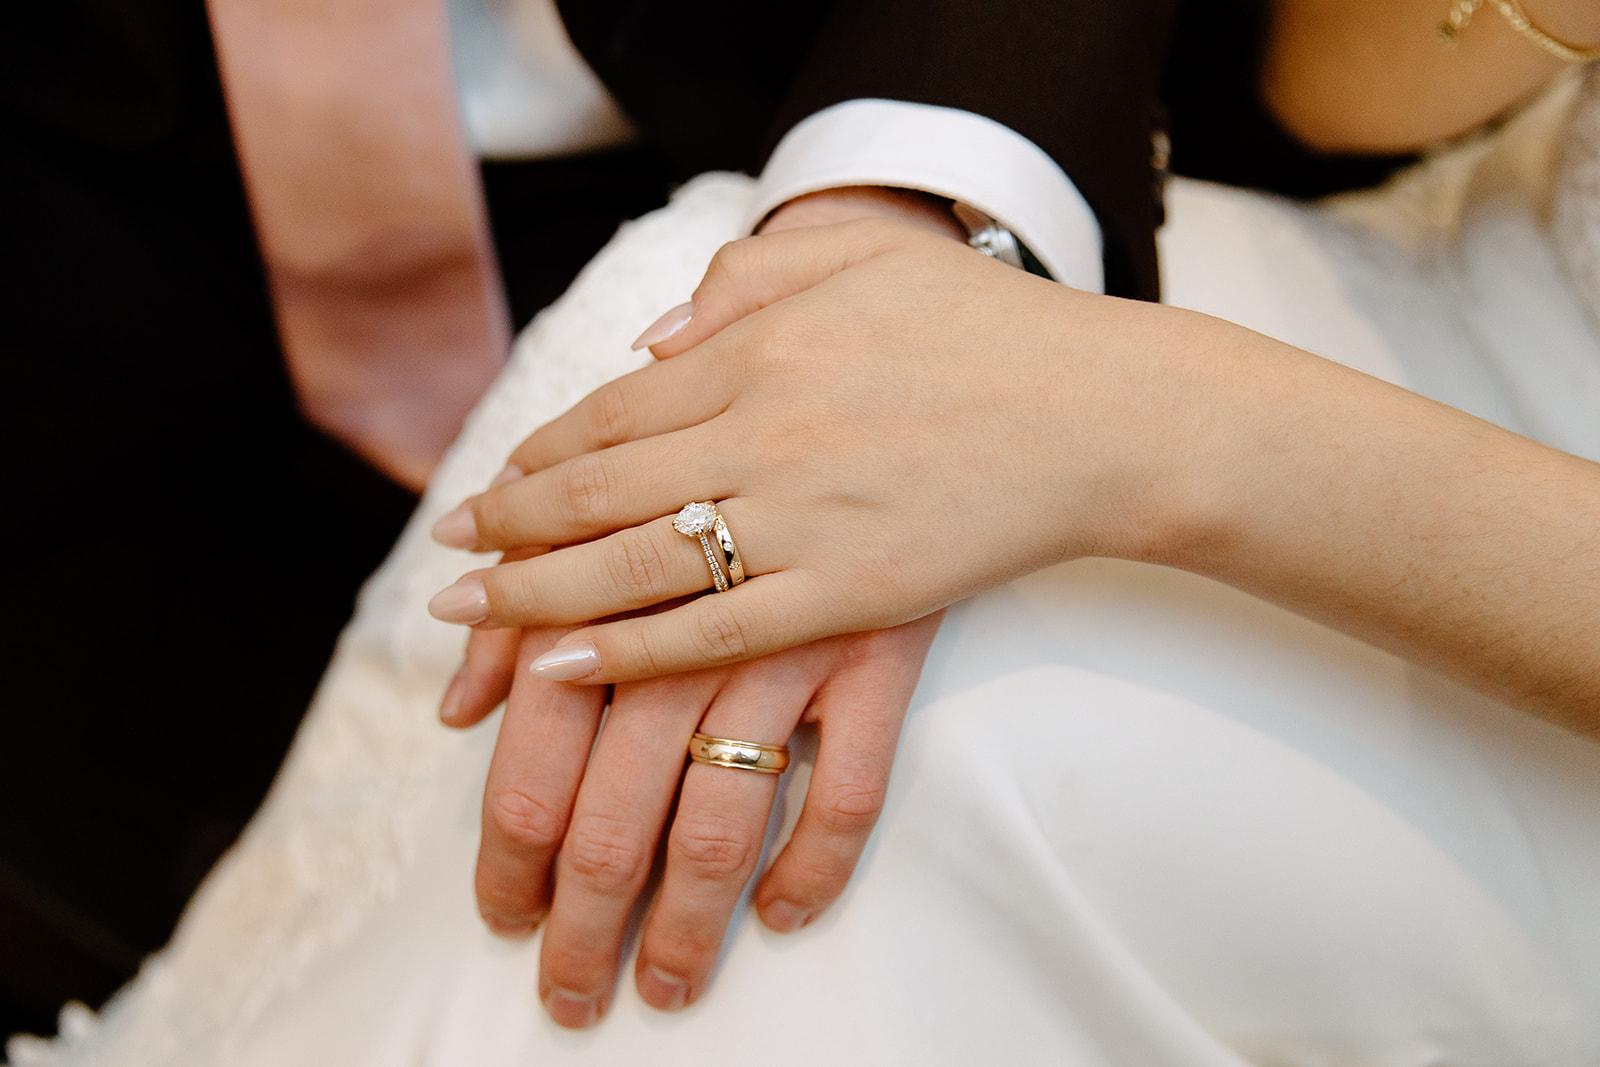 Bride and groom's hands with rings